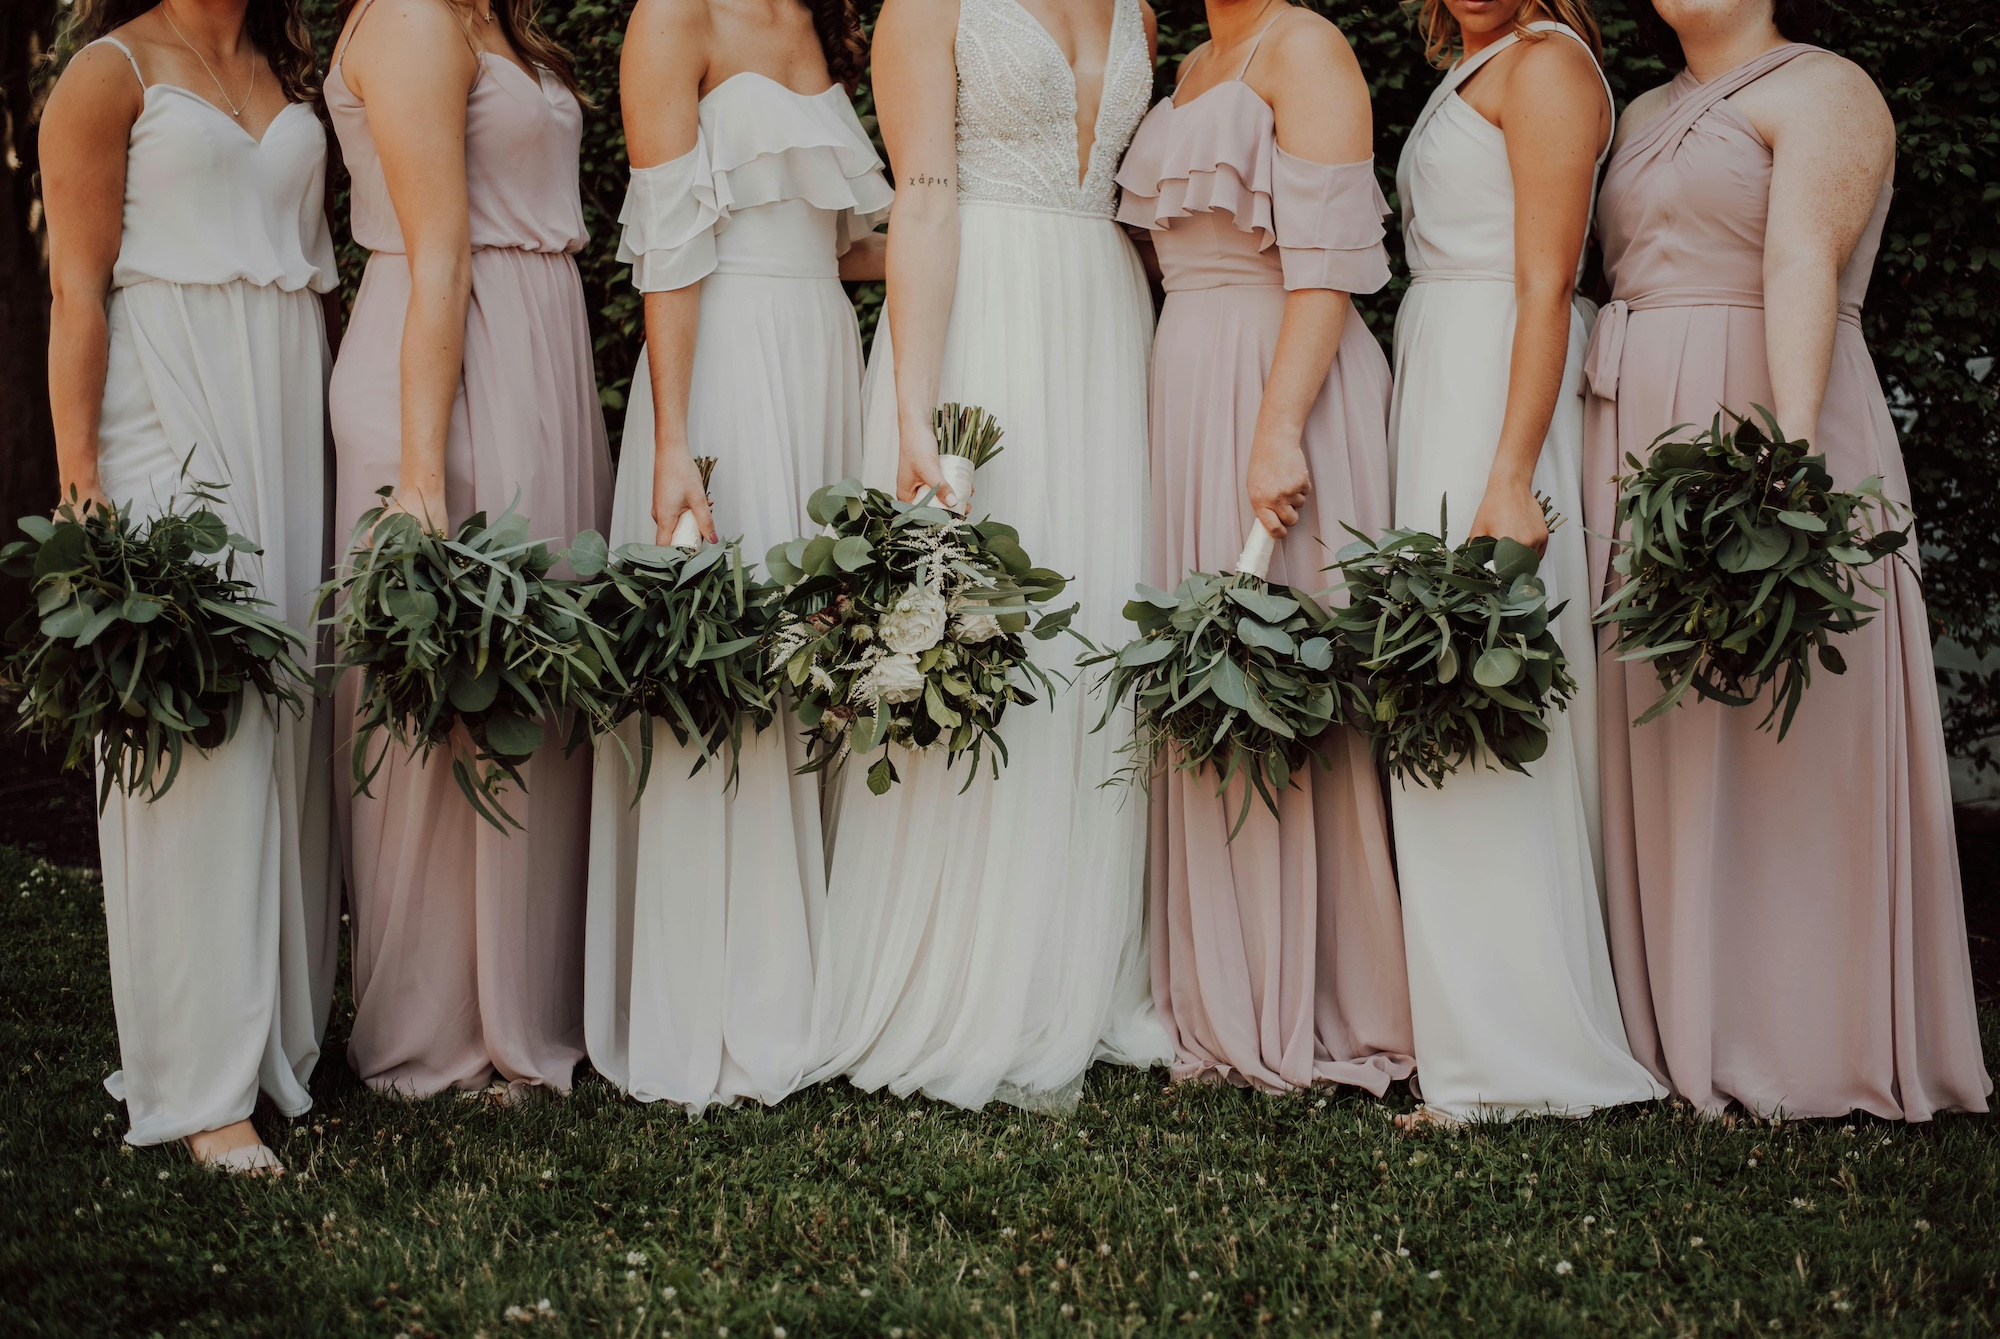 Bride with bridesmaids next to her